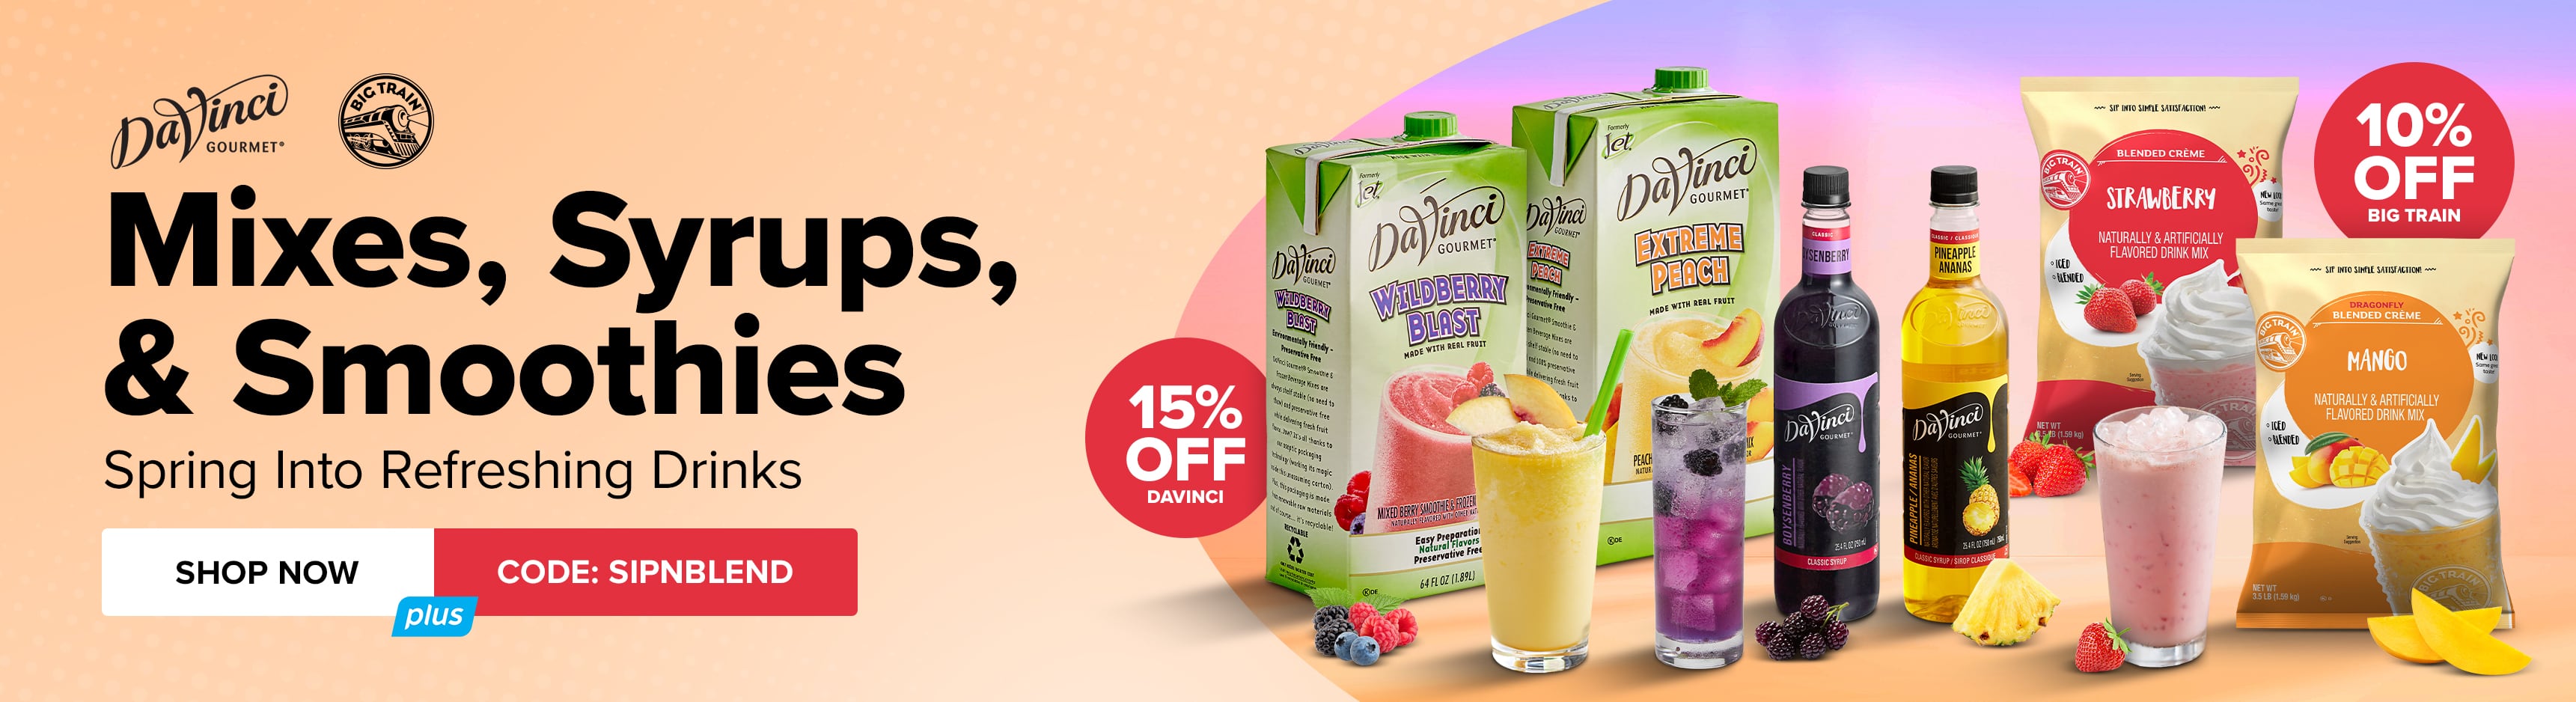 DaVinci and Big Train Mixes, Syrups, and Smoothies. Spring Into Refreshing Drinks. Shop Now. Use Code: SIPNBLEND and Save.